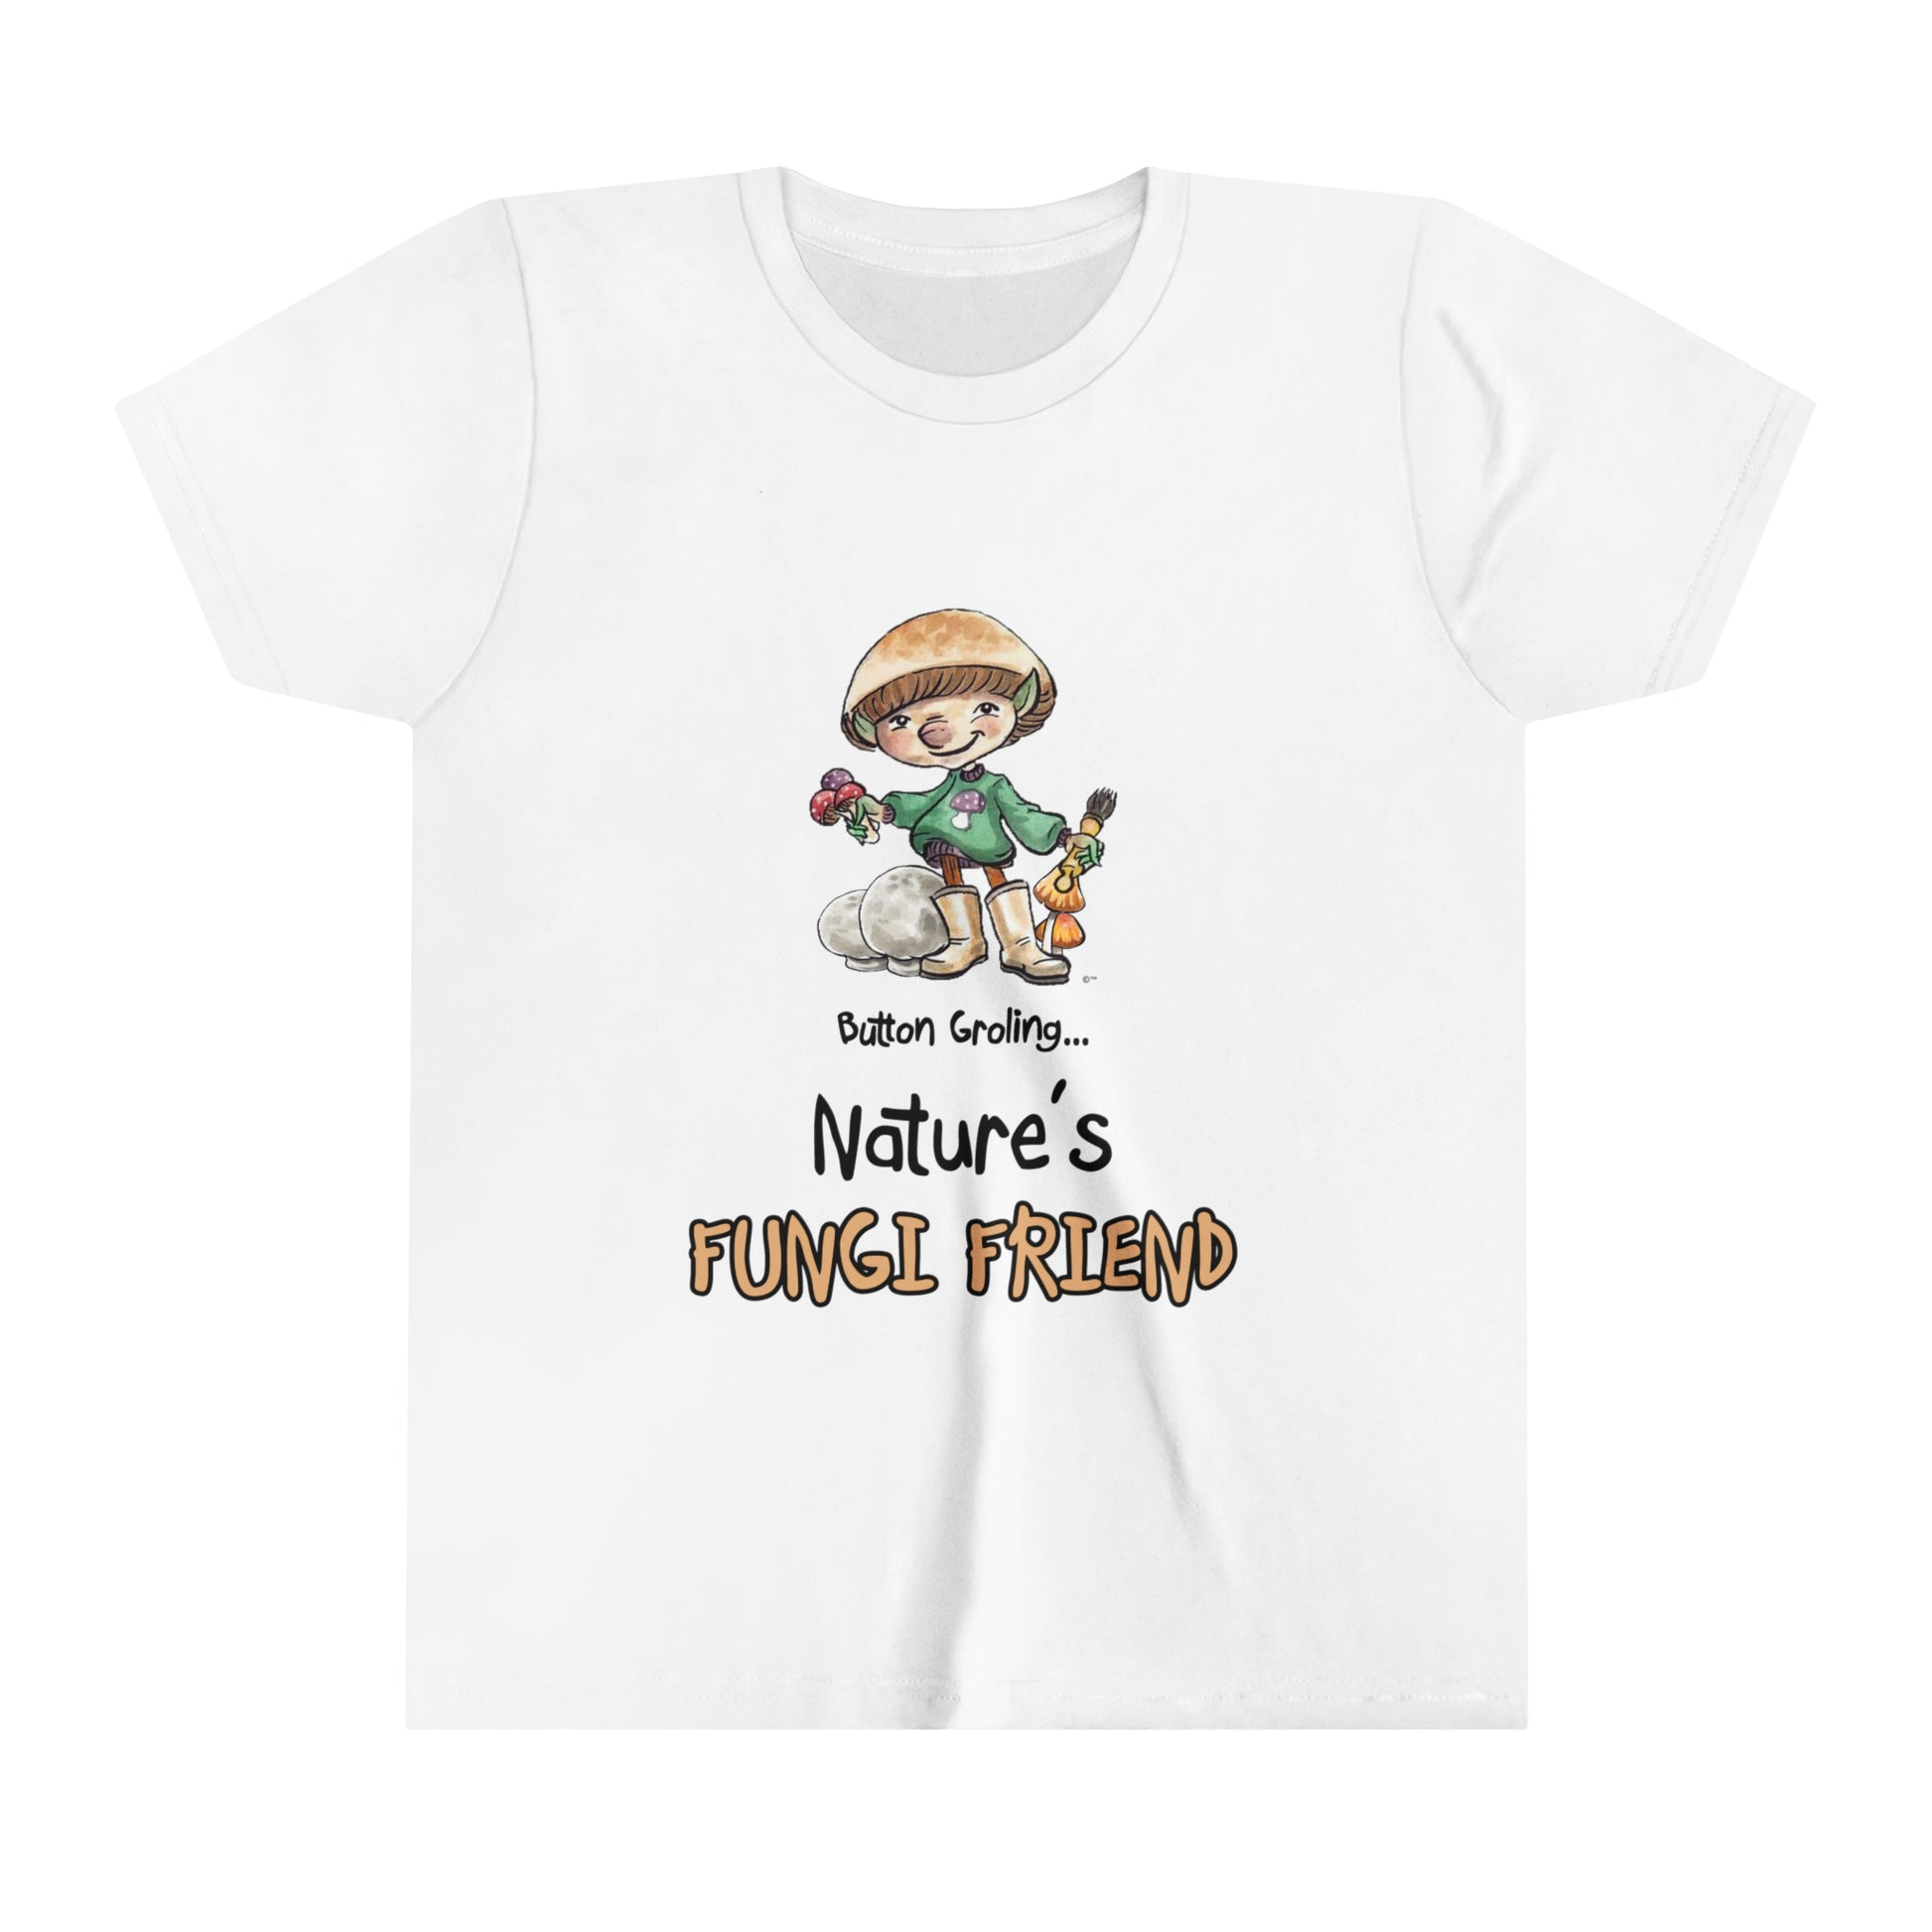 A white official Grolings kids' t-shirt, featuring the phrase 'Button Groling... Nature’s Fungi Friend.' The t-shirt showcases Button Groling, holding a little group of toadstools in one hand and a mushroom brush in the other. Beside Button Groling, there are two large puffball mushrooms, symbolising the importance of fungi in the forest ecosystem.